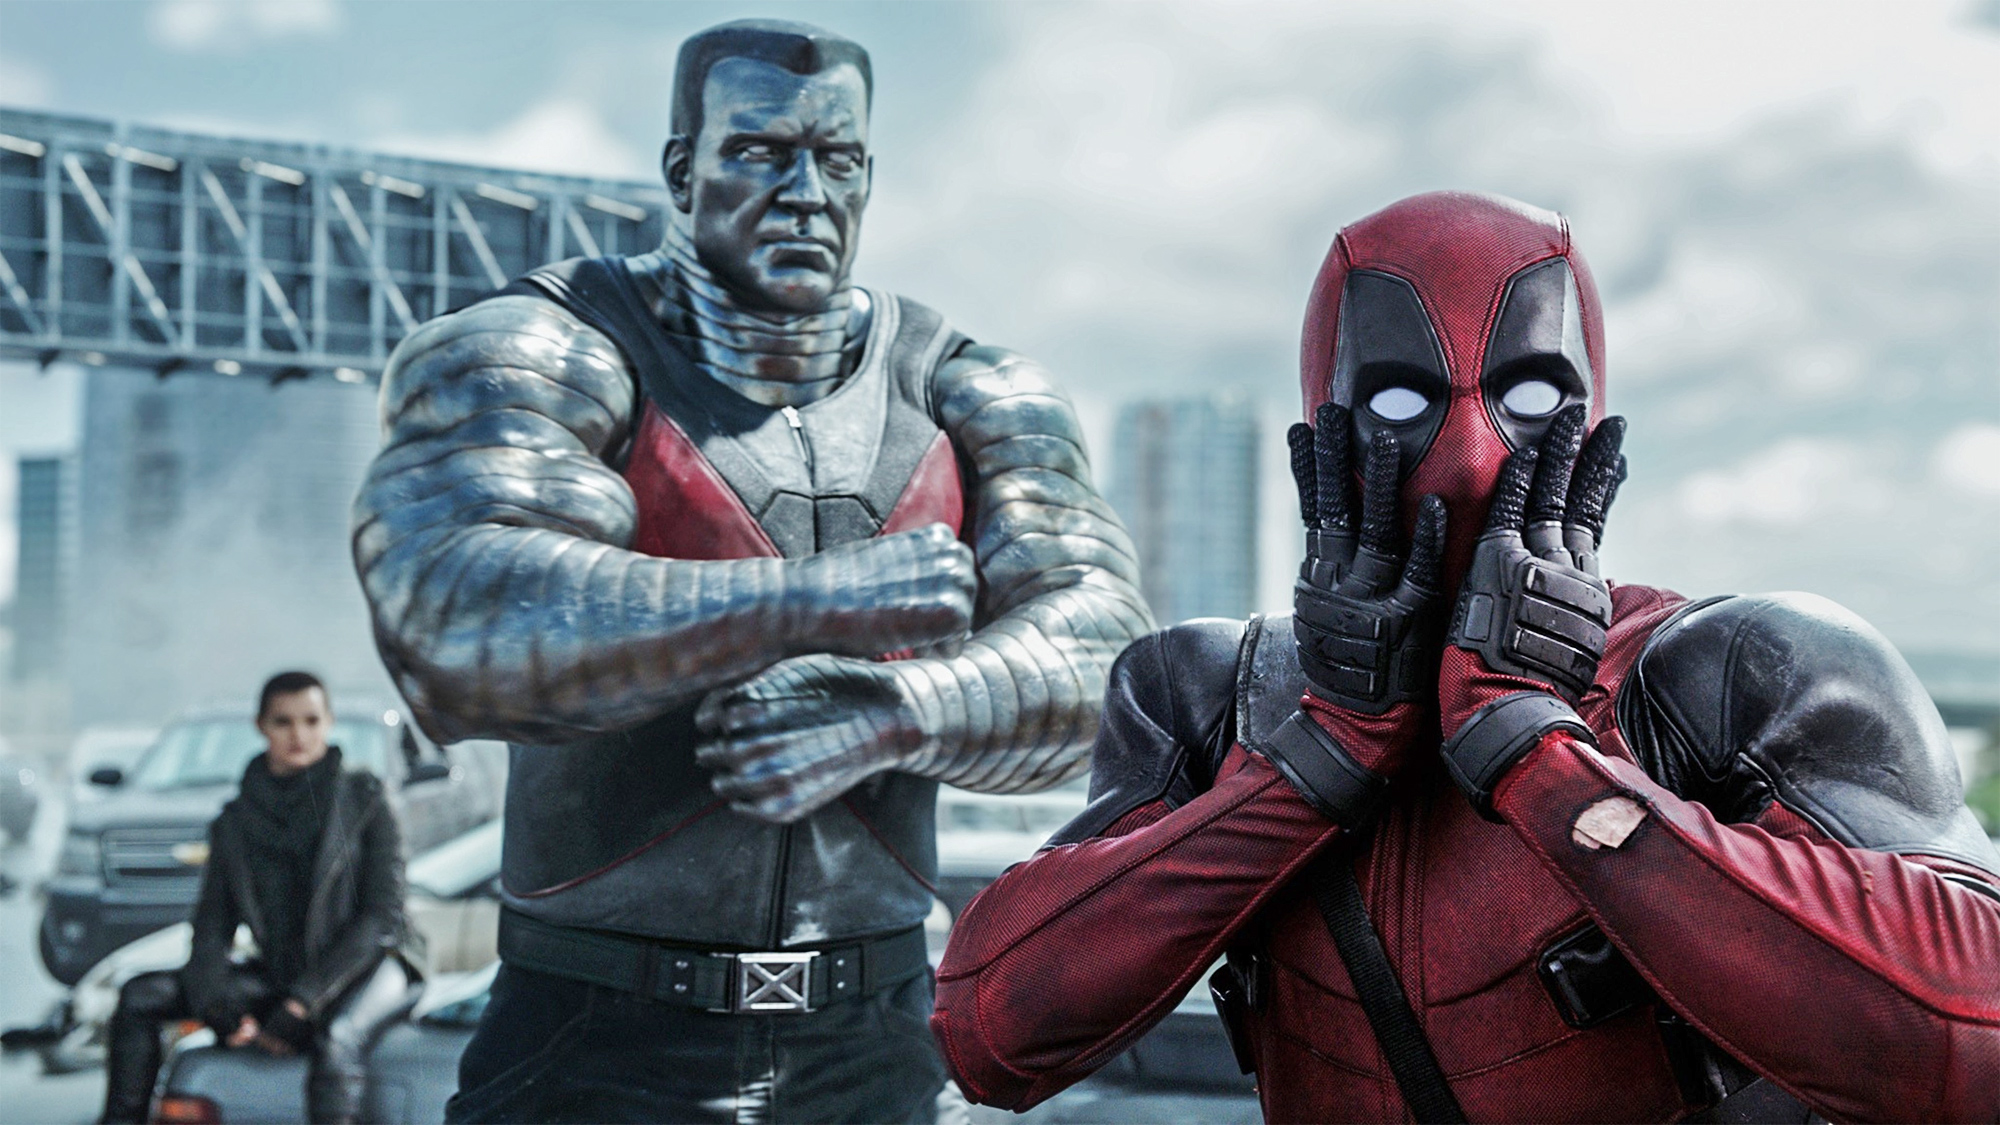 Negasonic Teenage Warhead, Colossus, and Deadpool, 3 potential characters for deadpool 3, one of the upcoming marvel movies